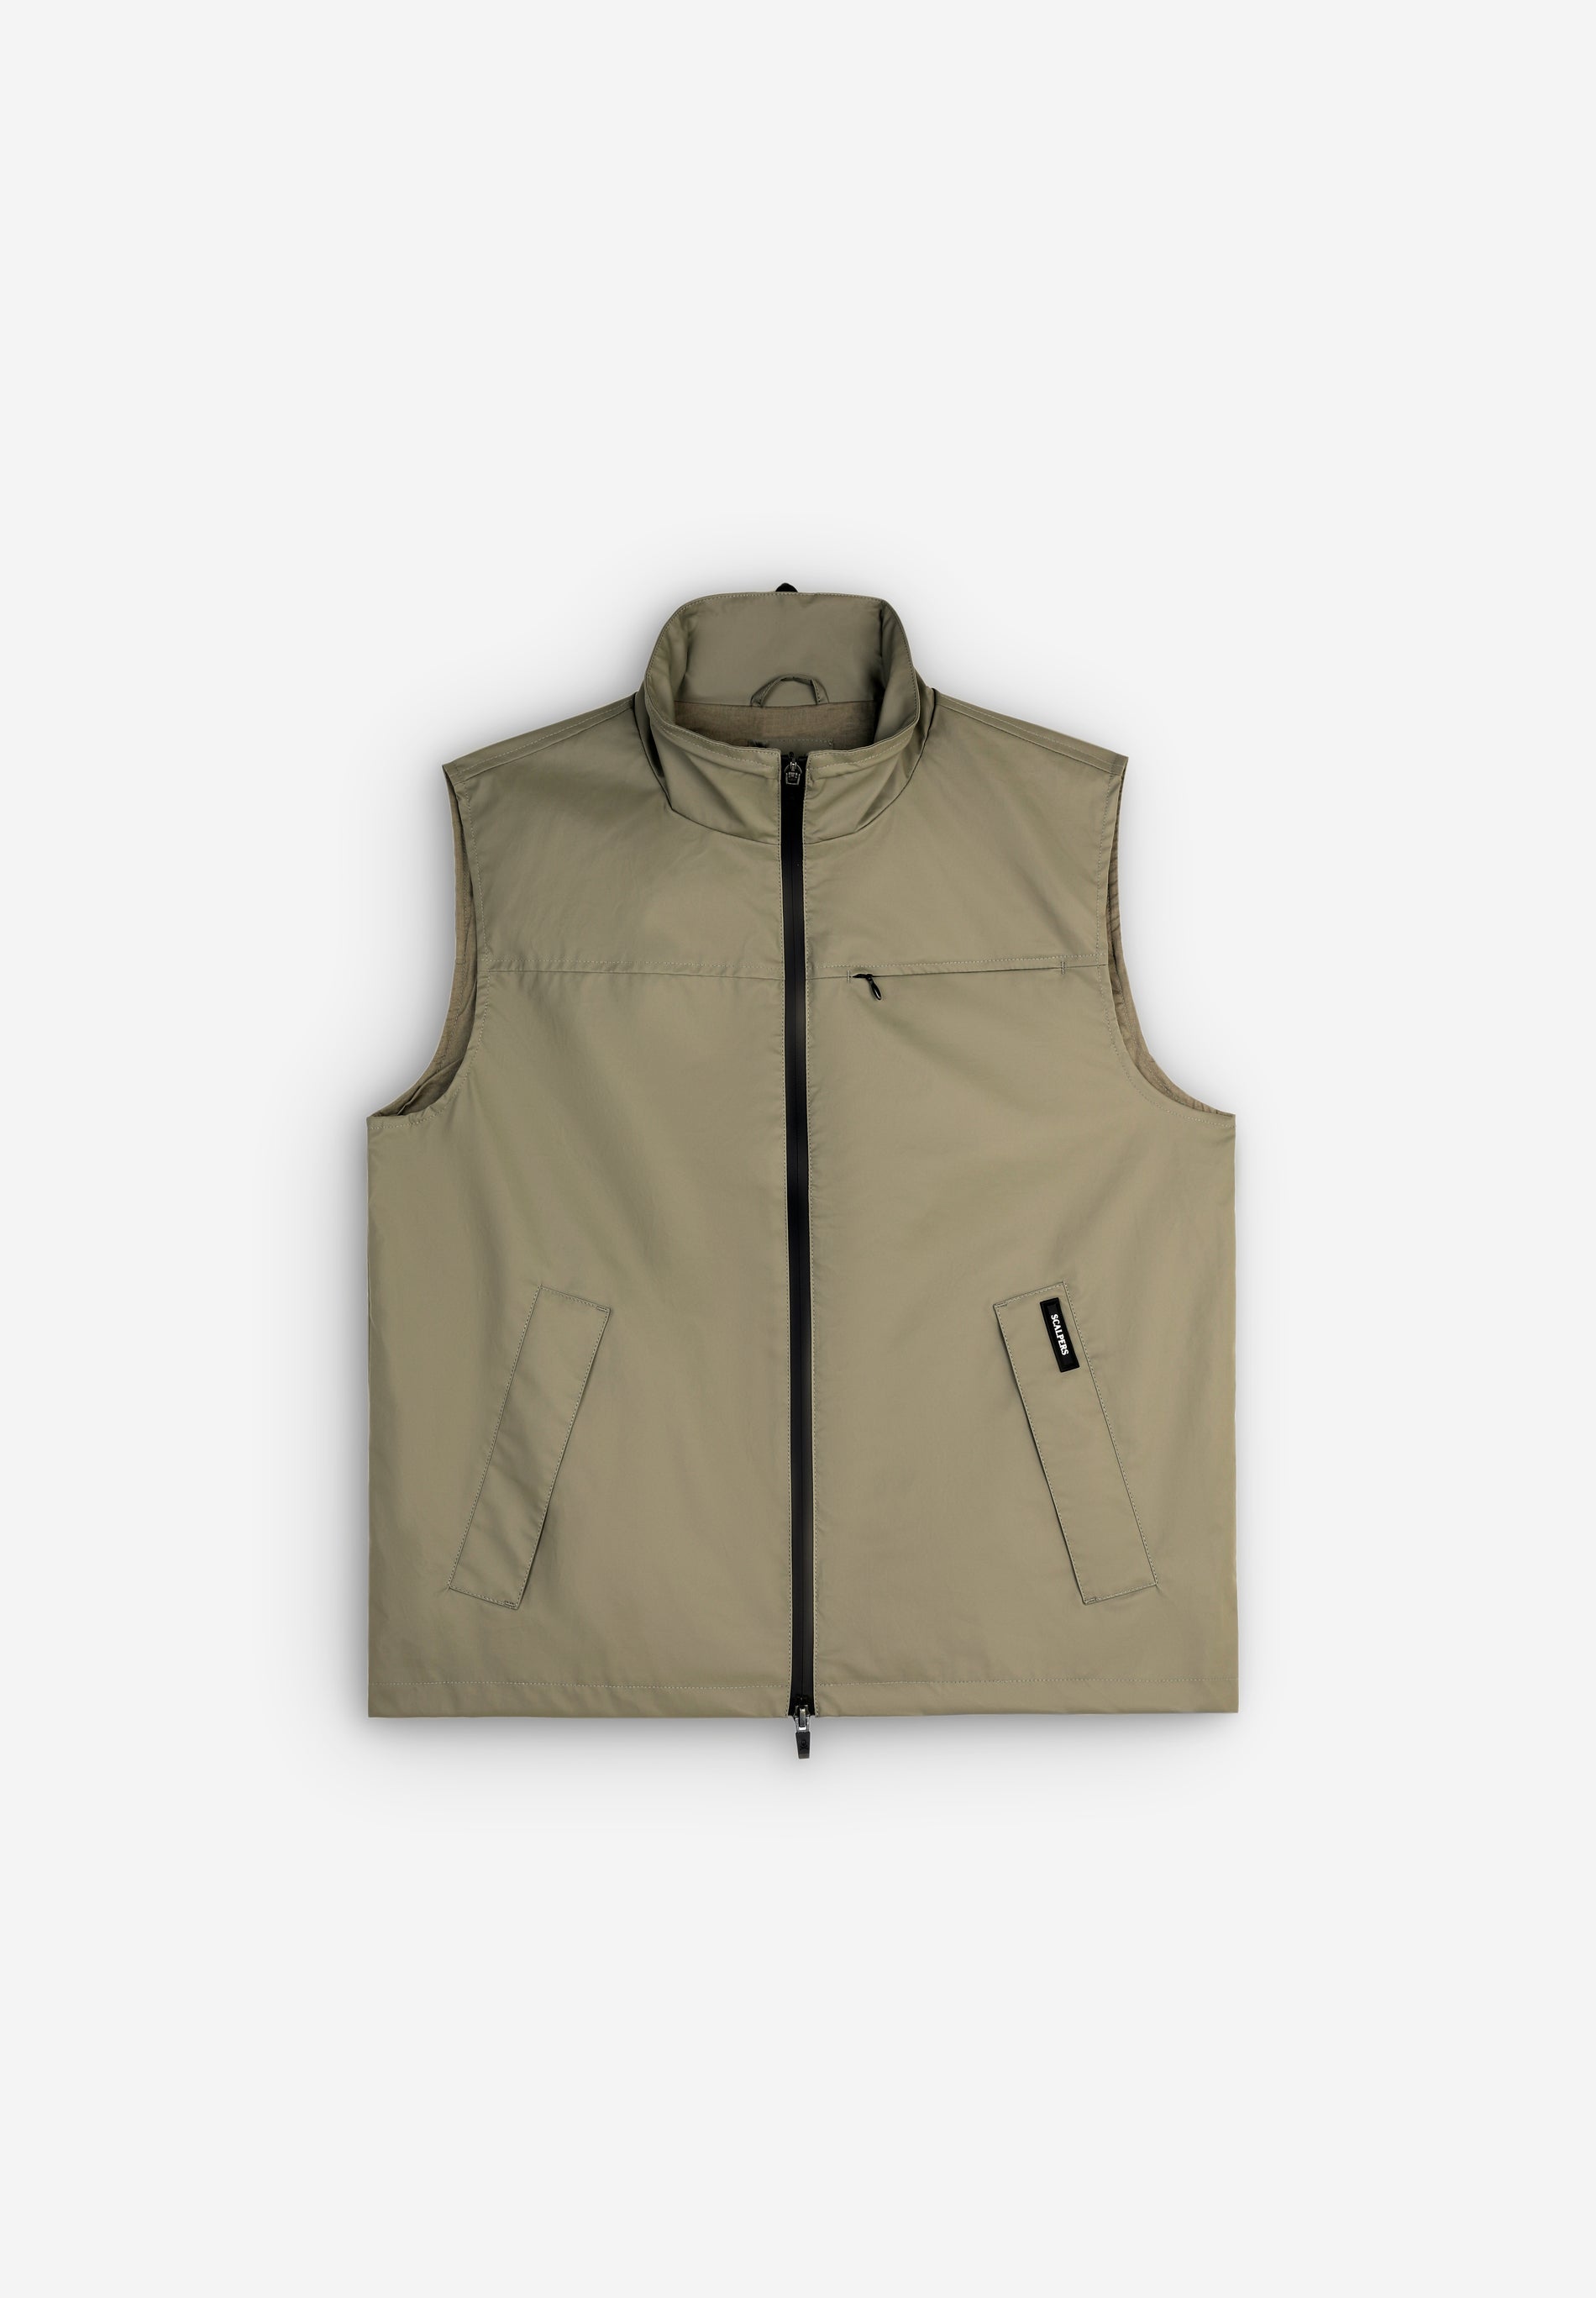 Kiryuyrik】Water Proof Cowlether Vest | camillevieraservices.com